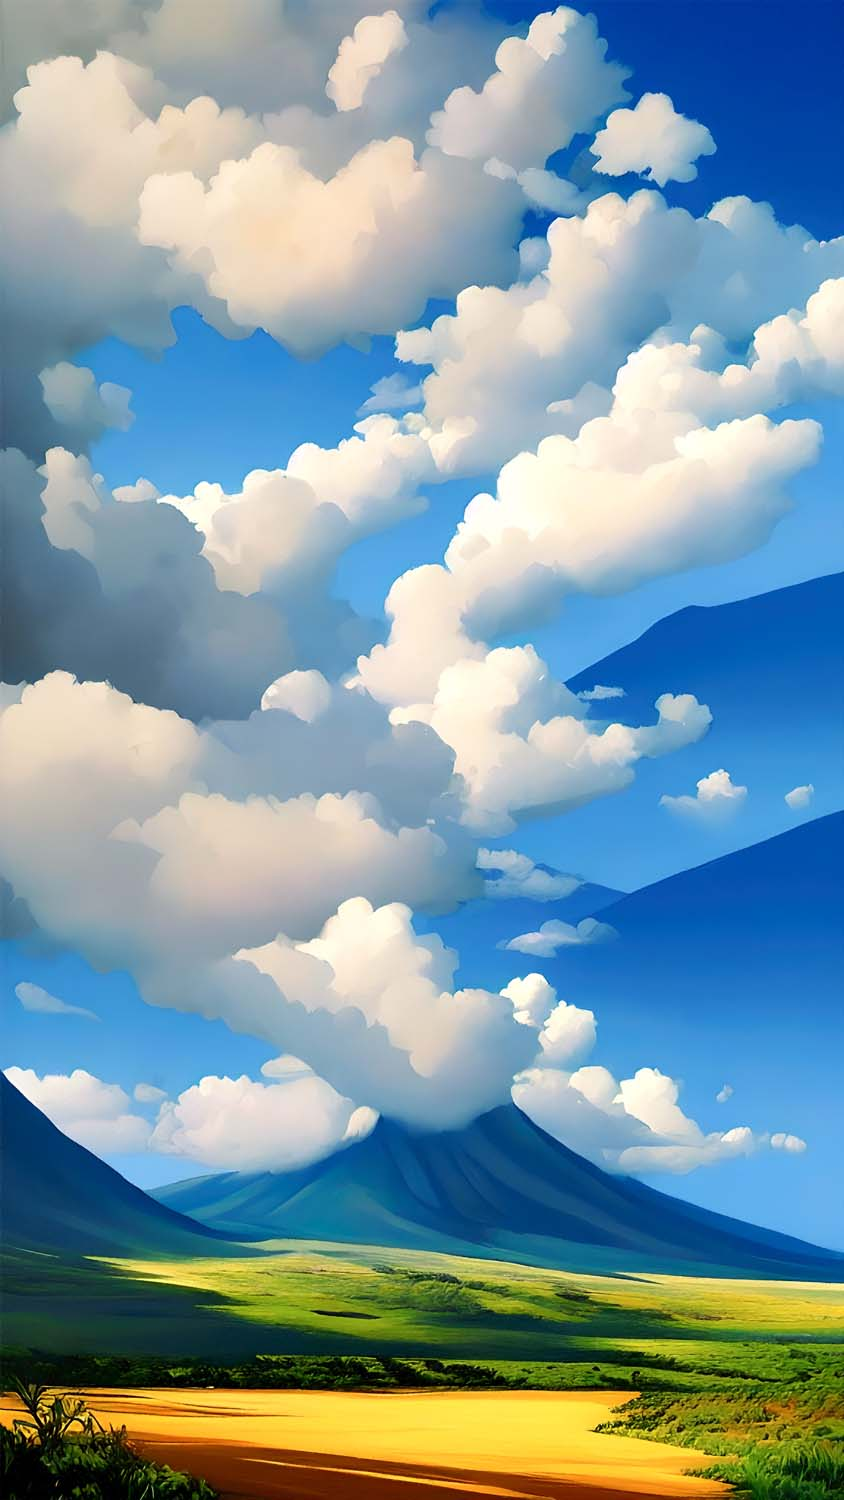 Sun Clouds IPhone Wallpaper HD  IPhone Wallpapers